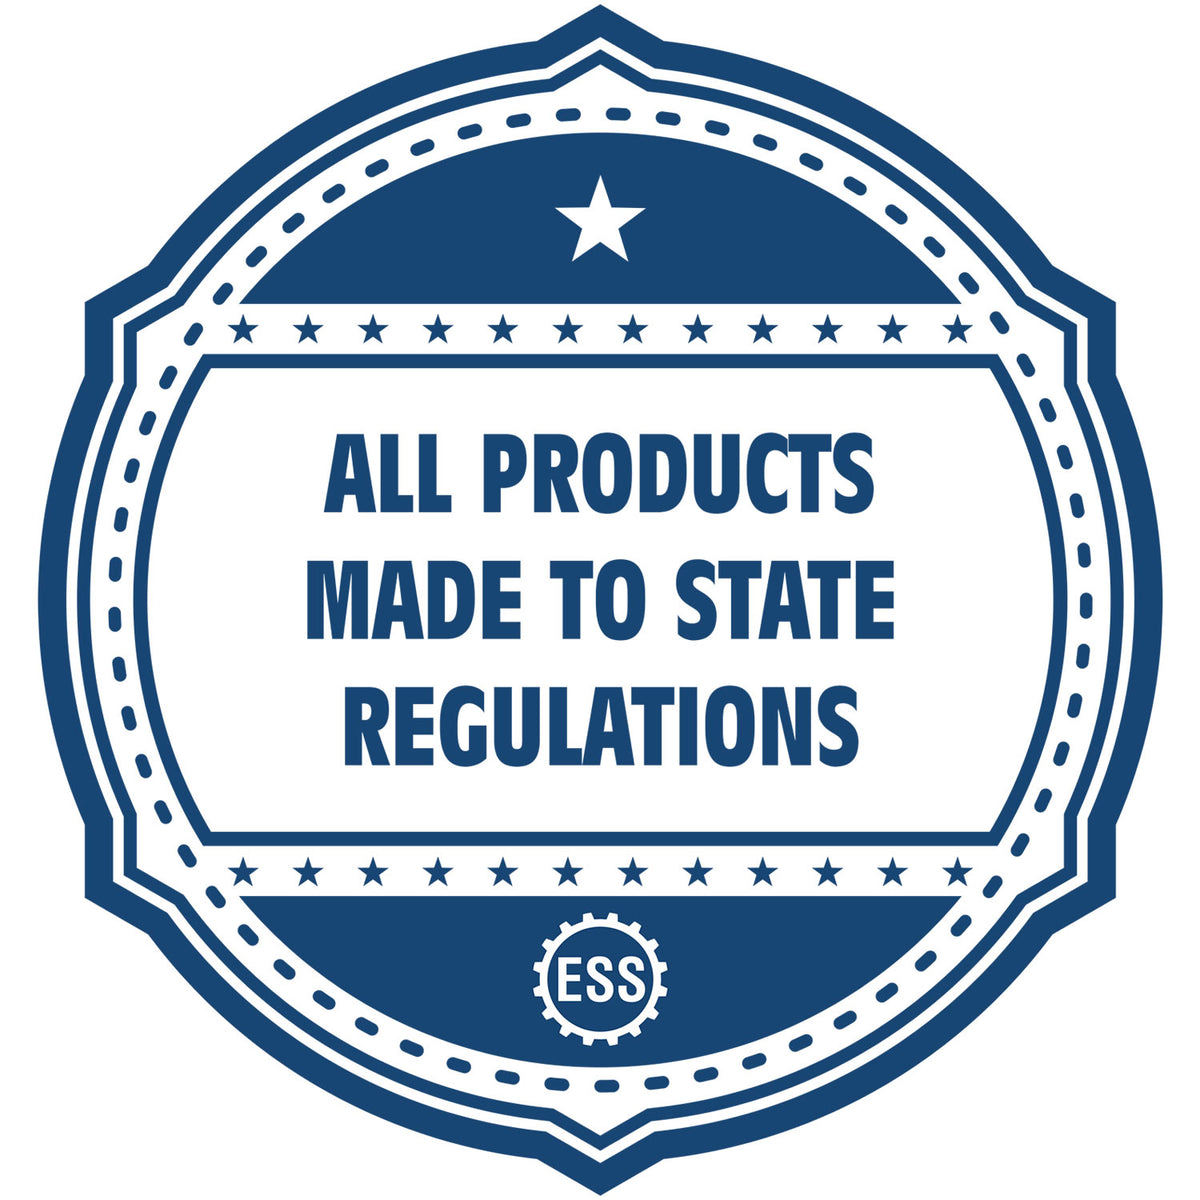 A blue icon or badge for the Gift Alabama Architect Seal showing that this product is made in compliance with state regulations.